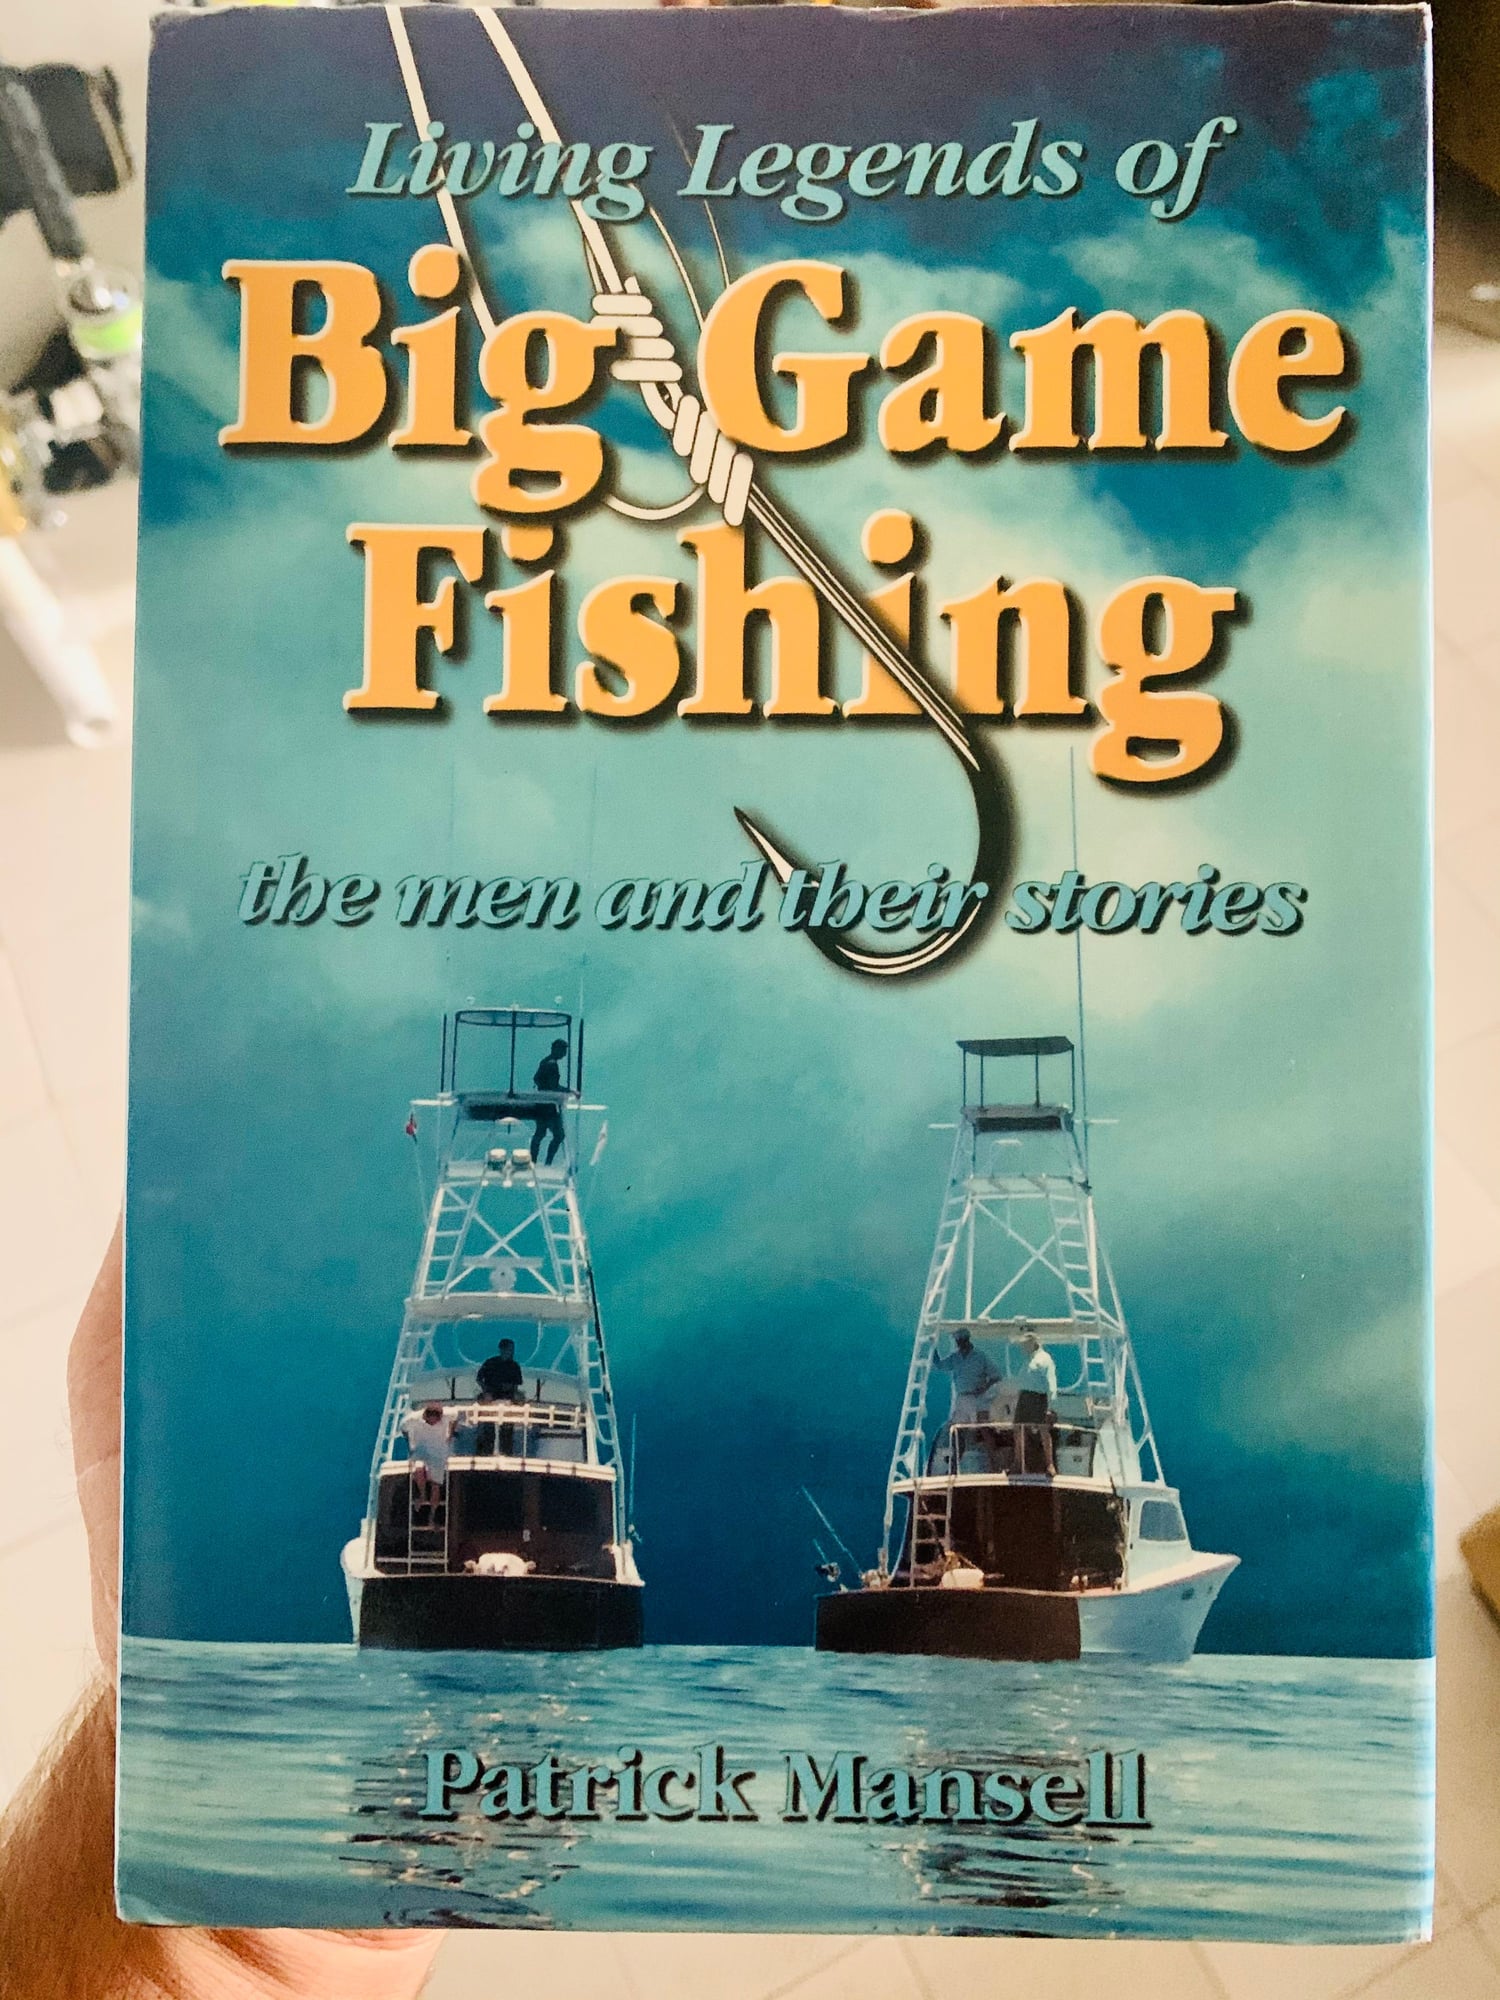 Classic book on sport fishing - The Hull Truth - Boating and